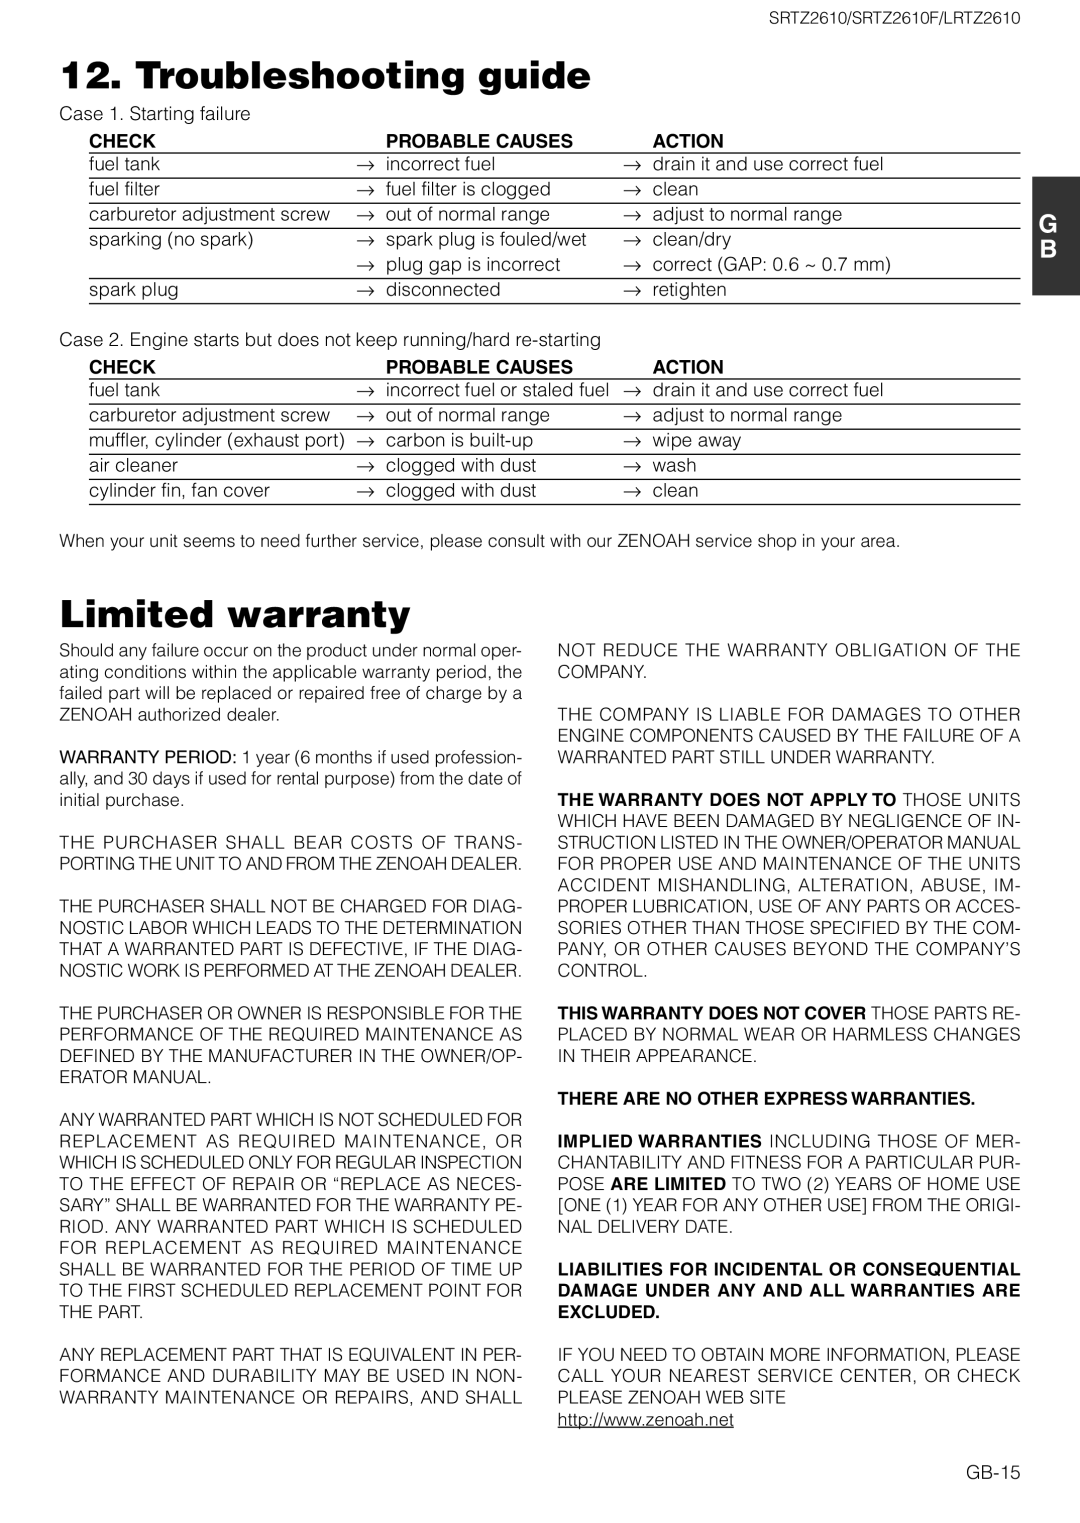 Zenoah SRTZ2610F, LRTZ2610 owner manual Troubleshooting guide, Limited warranty, Check, Probable Causes, Action 